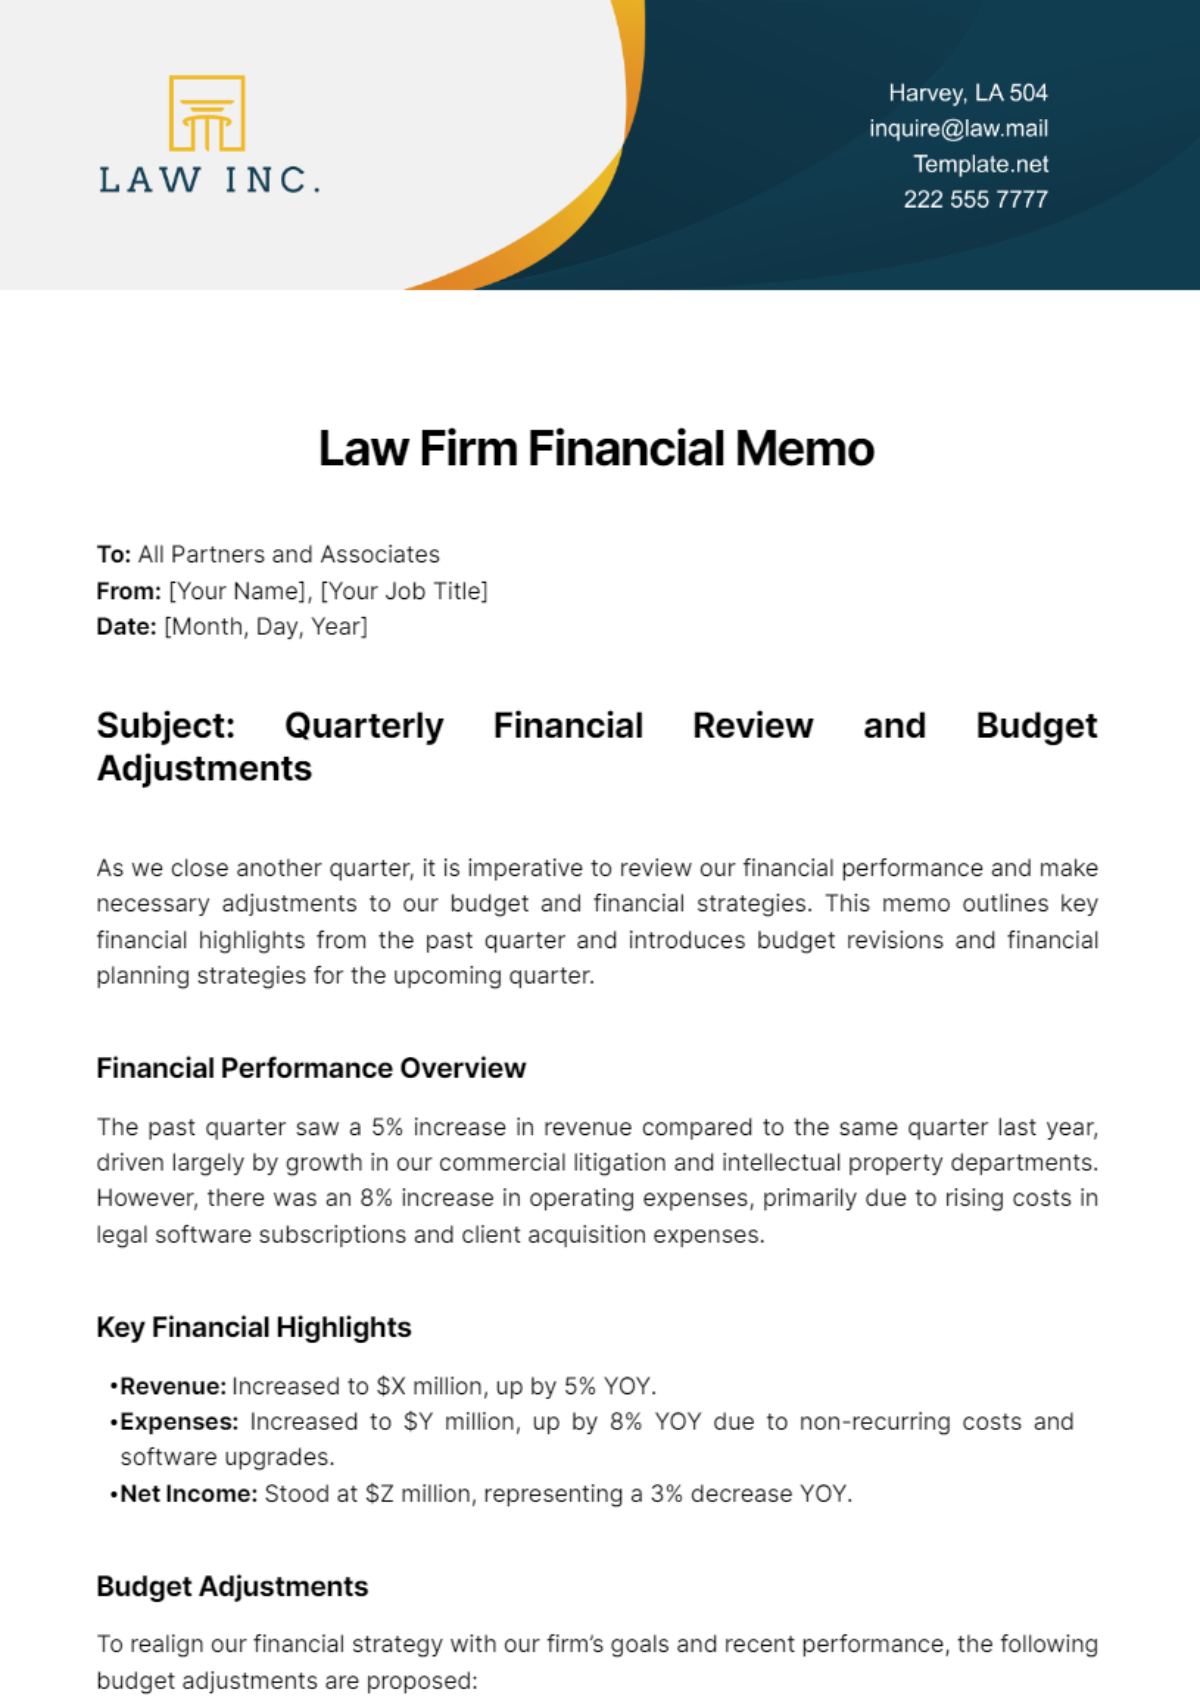 Law Firm Financial Memo Template